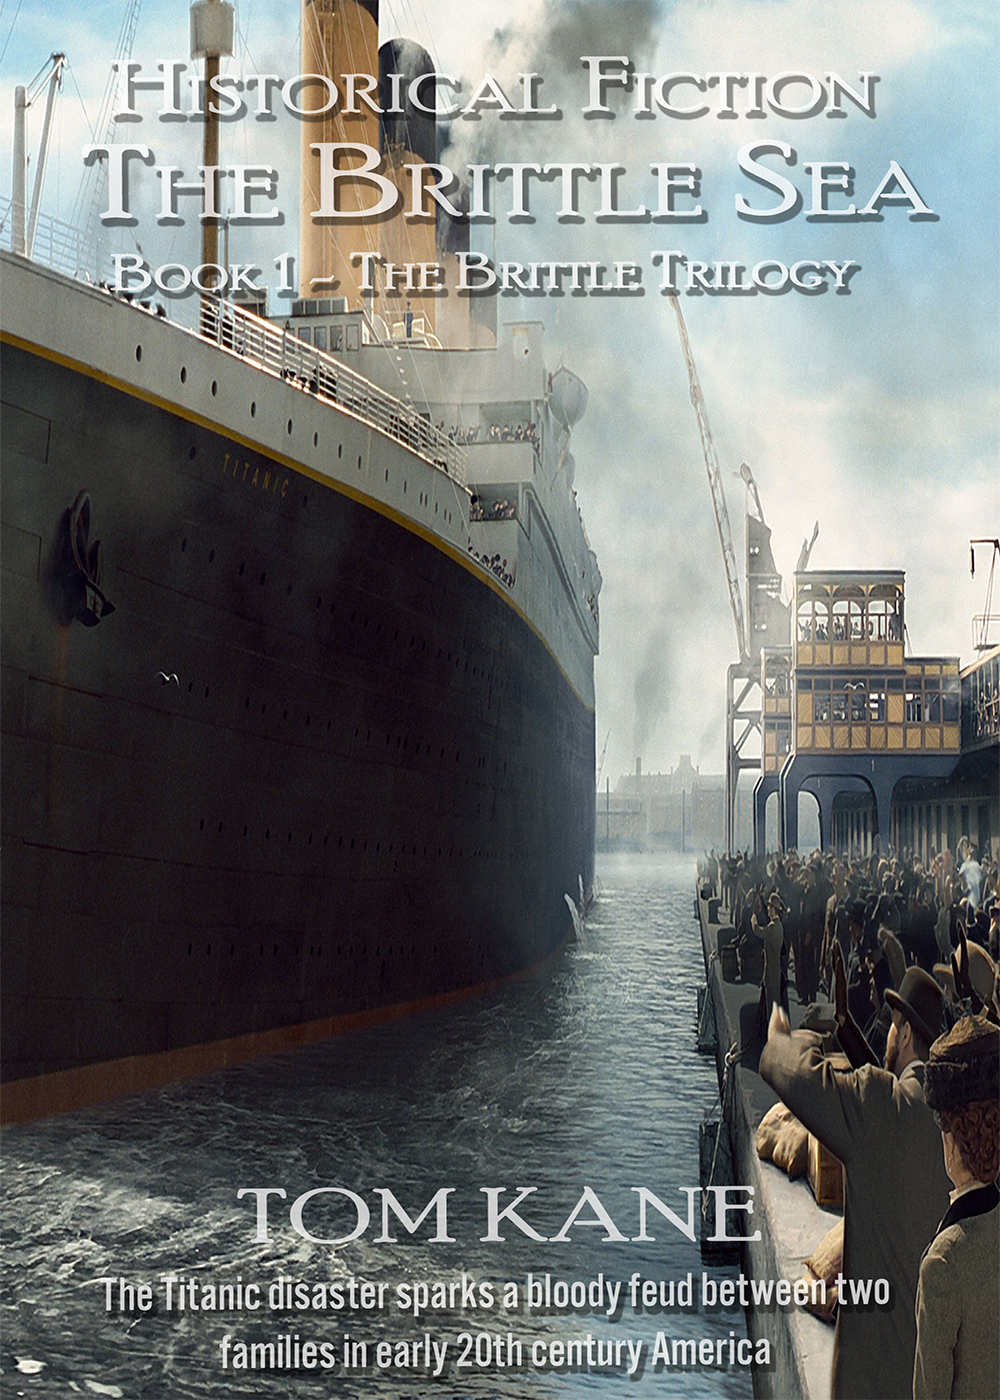 FREE: The Brittle Sea by Tom Kane